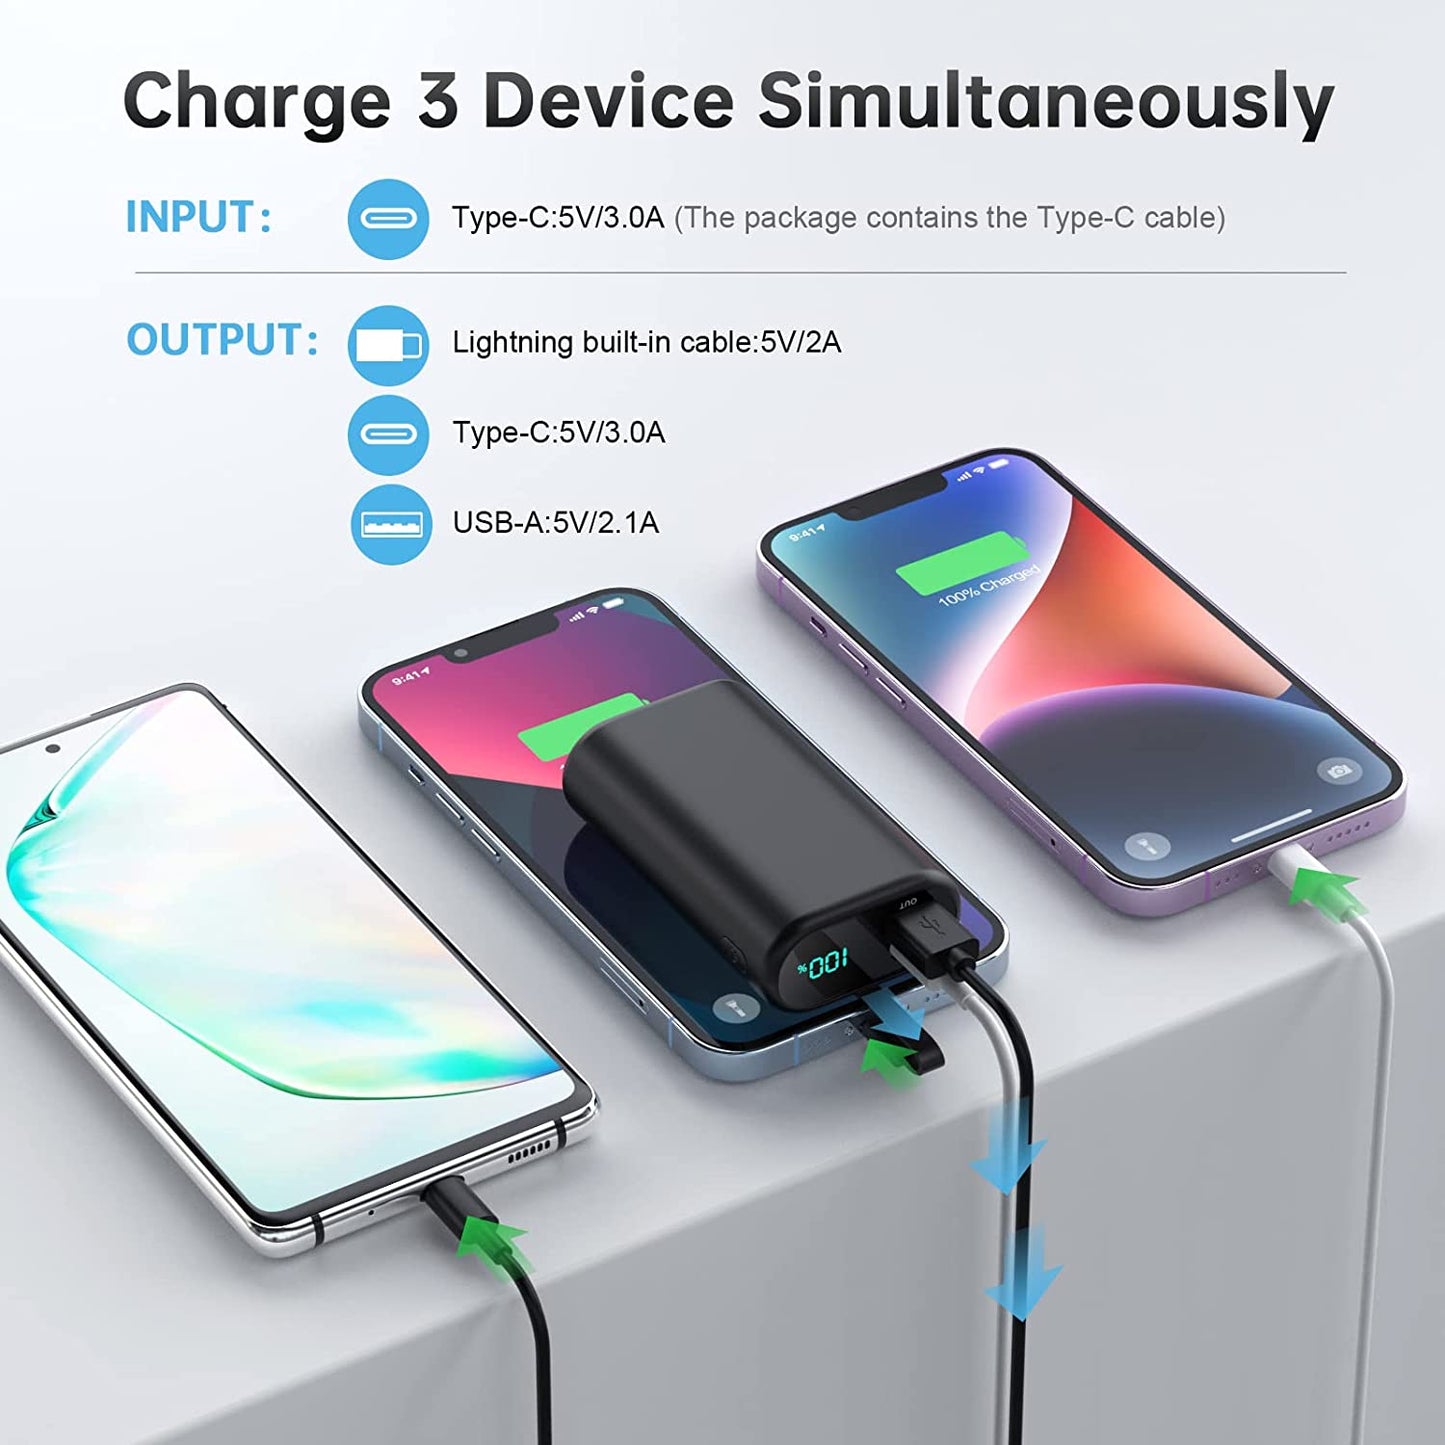 Portable Charger 10800Mah for Iphone,Small & Ultra-Compact 15W PD Fast Charging Power Bank ,LCD Display Battery Pack with Built-In-Cable Compatible with Iphone 14/14 Pro Max /13/12/X/XR/XS/8/7/6 Etc